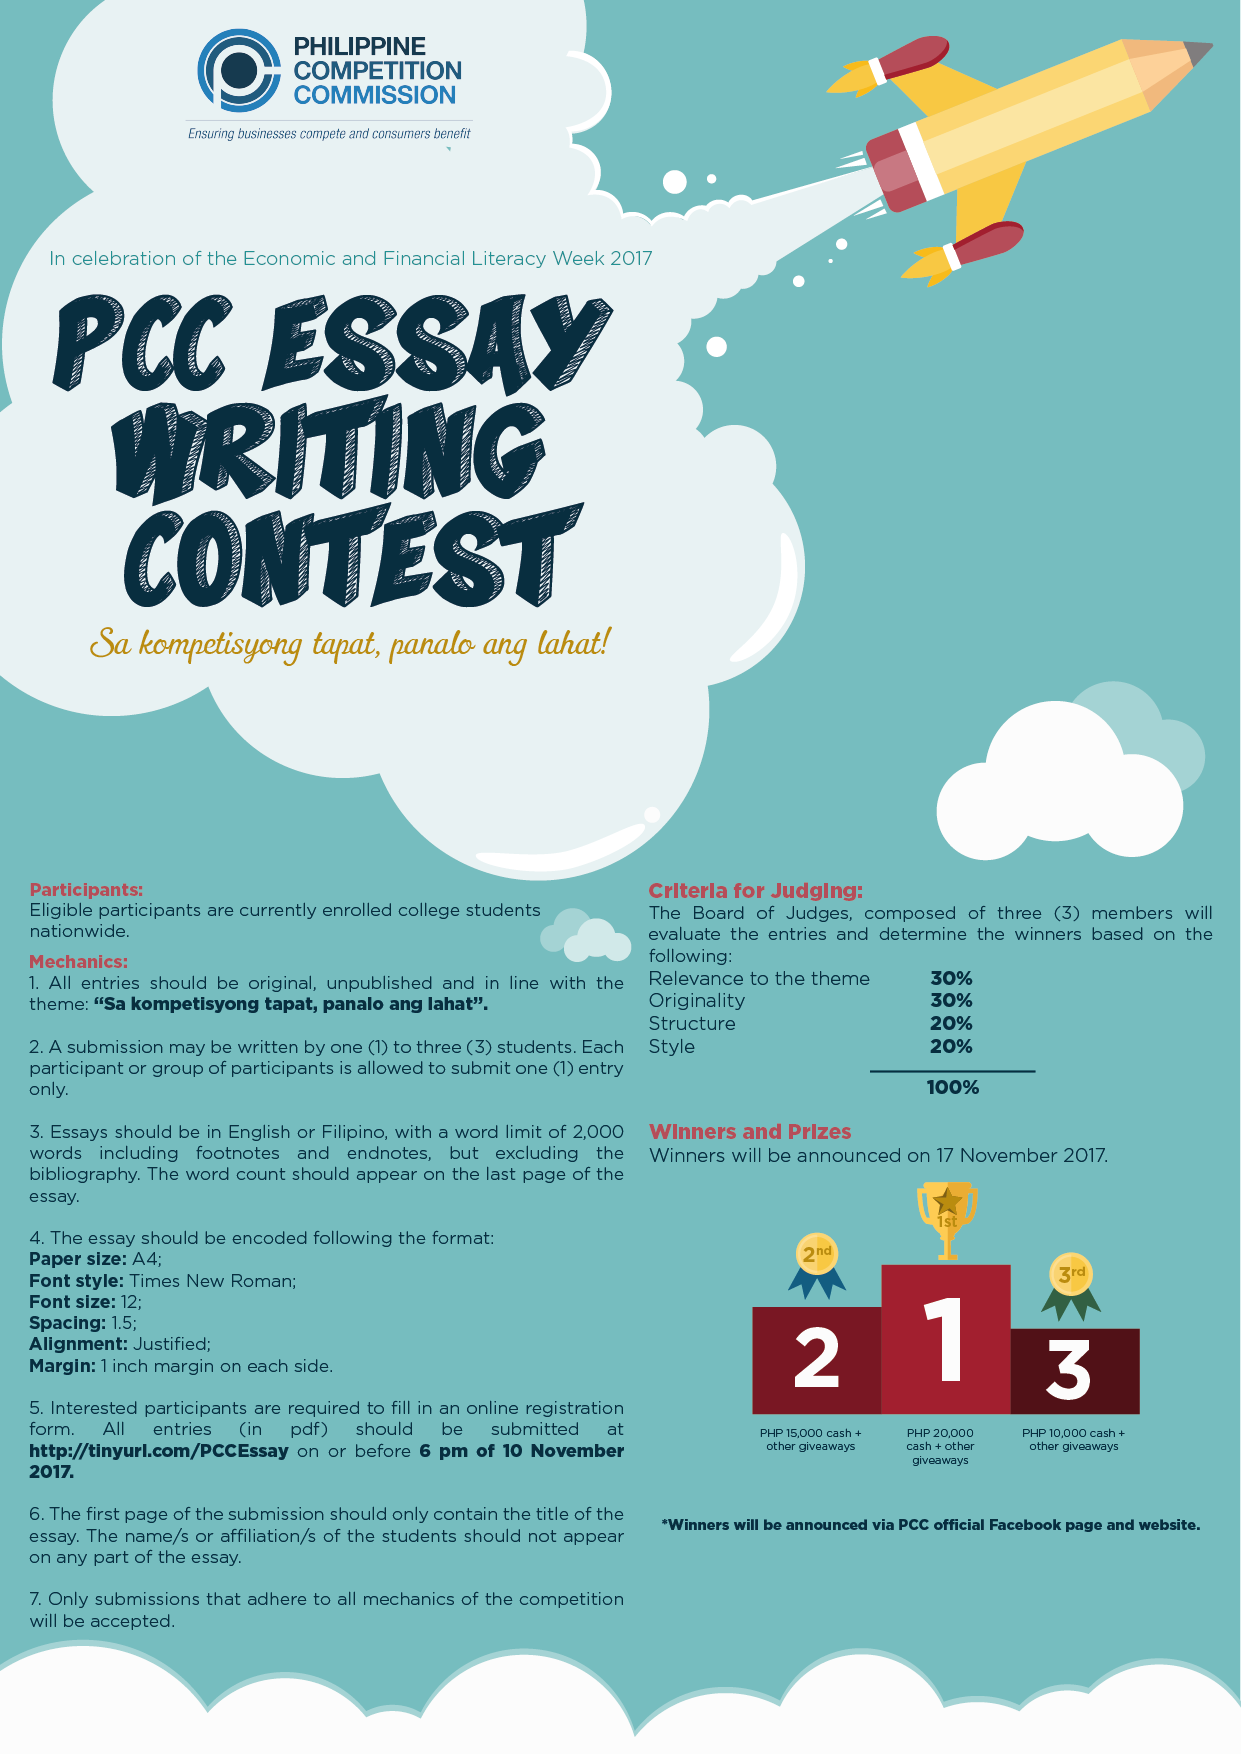 essay writing contest poster